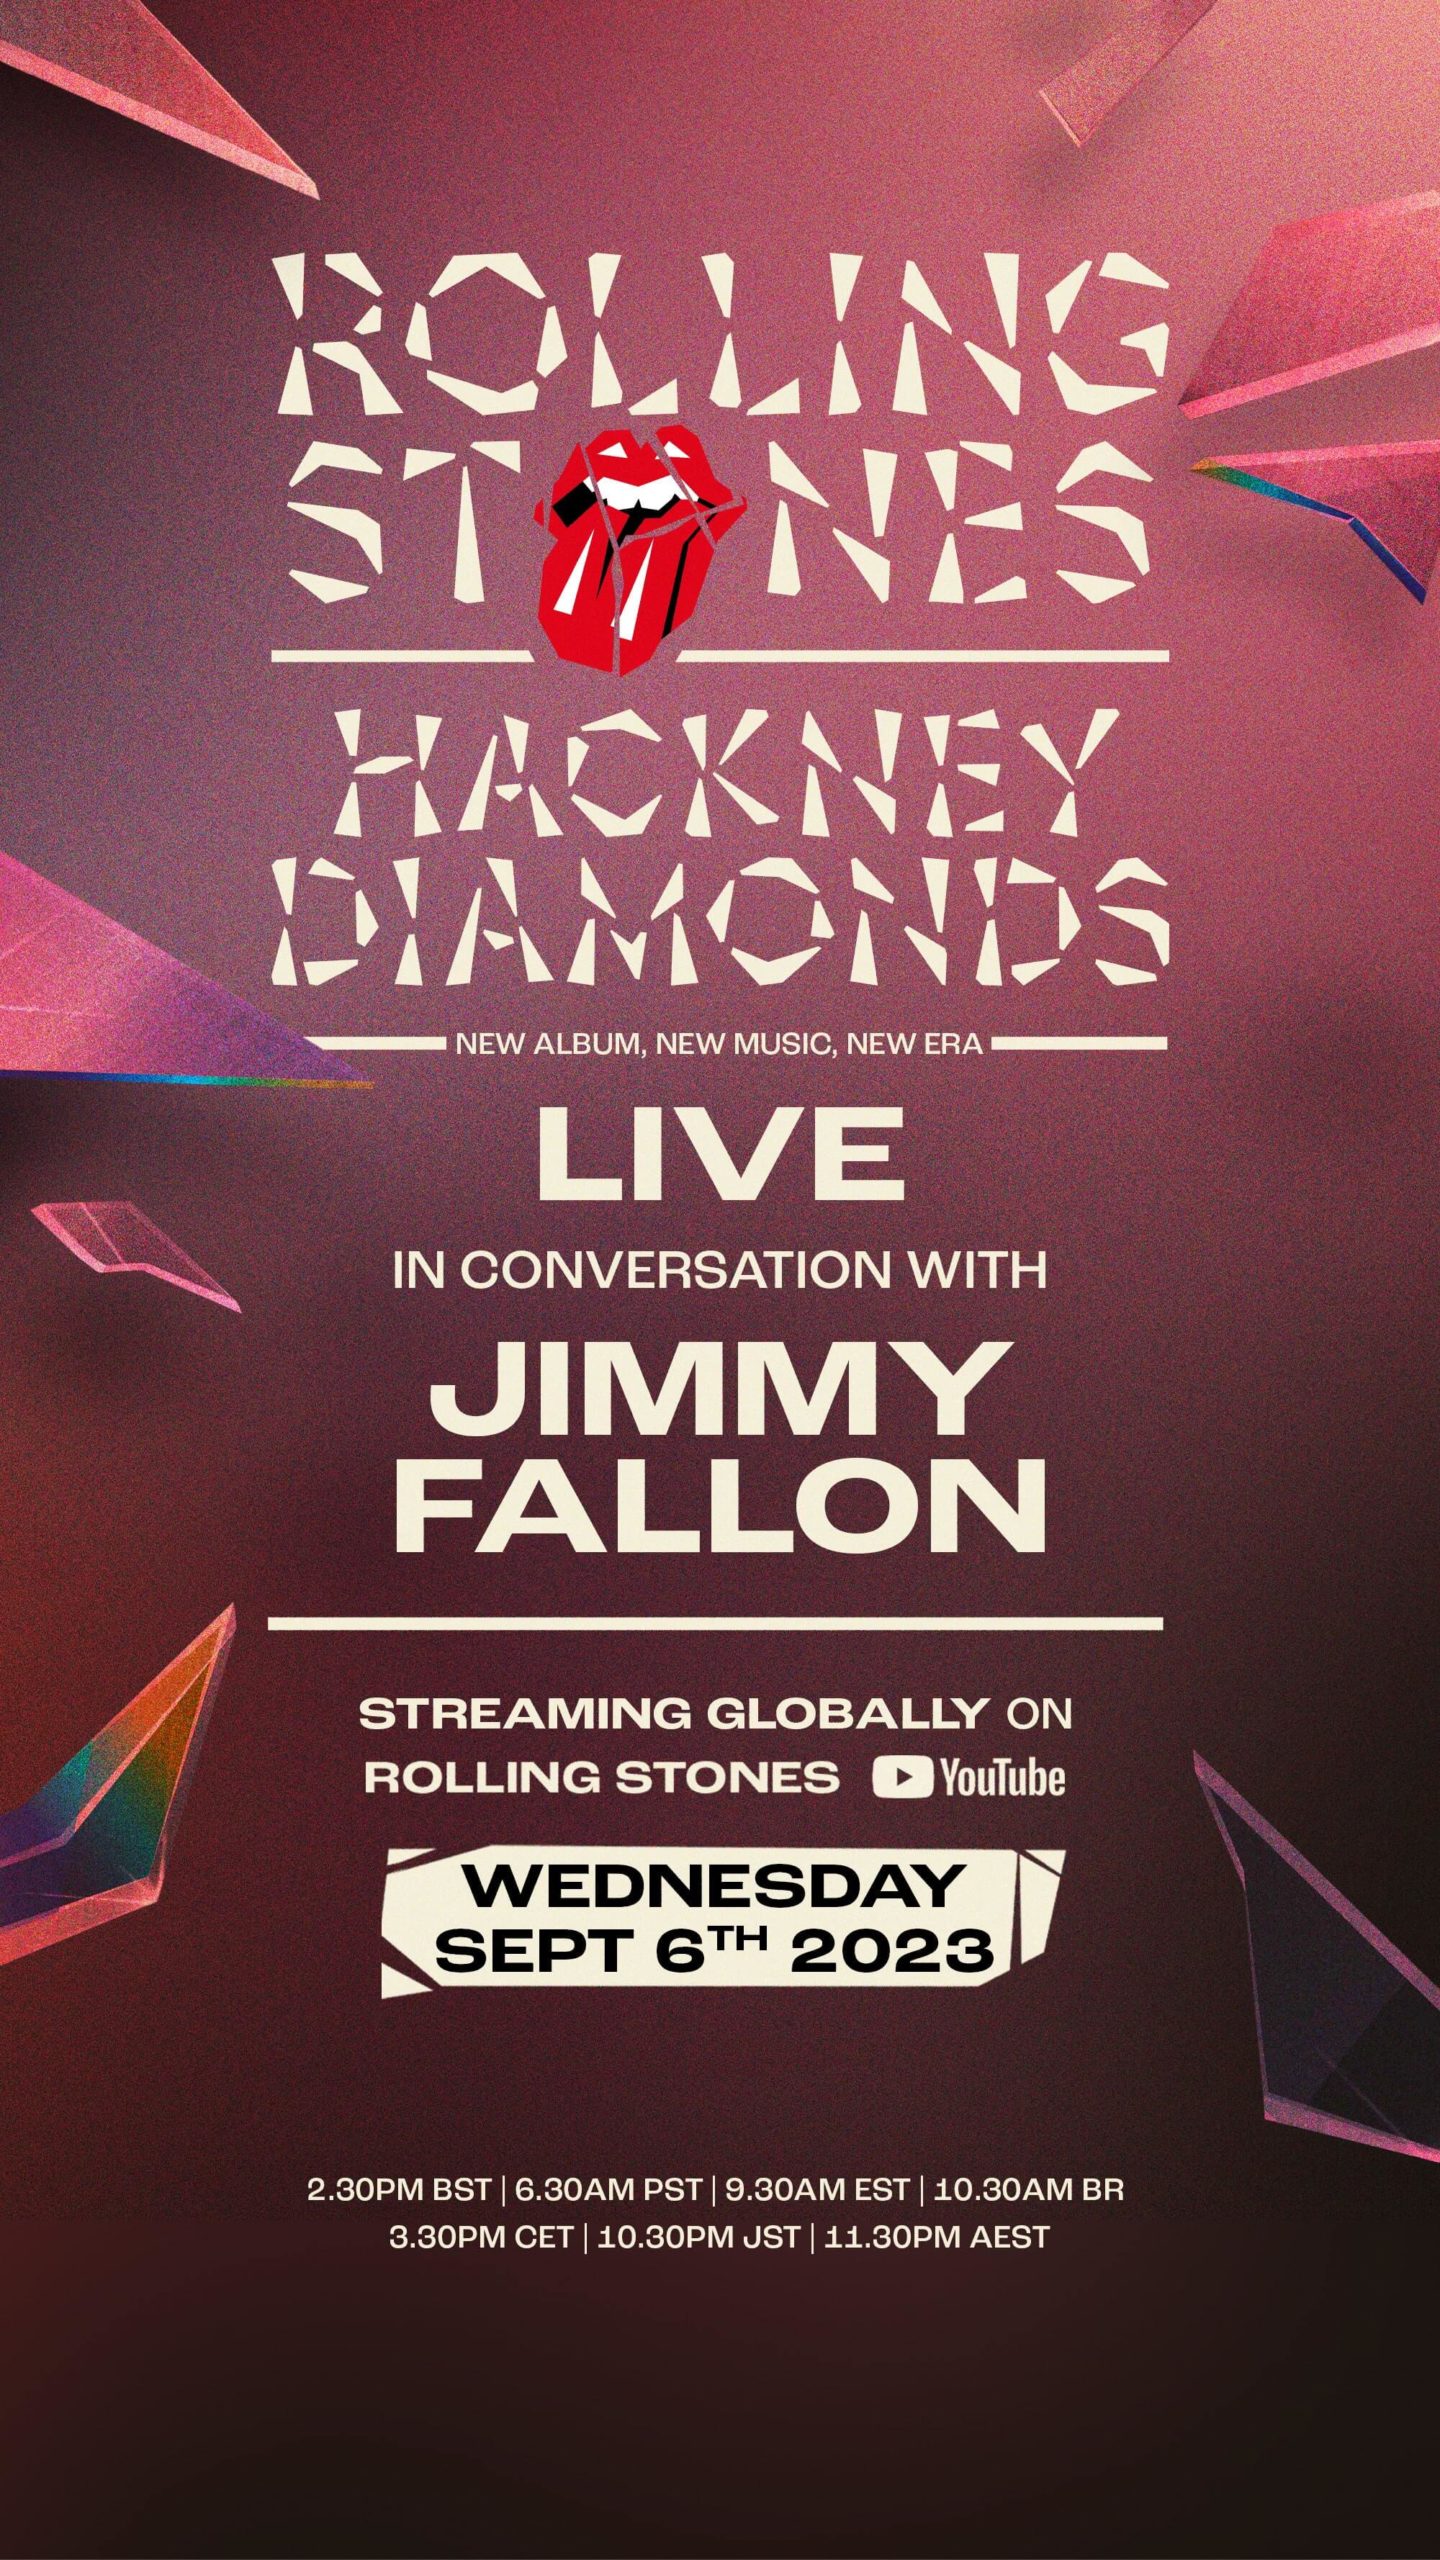 The Rolling Stones To Unveil Details About Hackney Diamonds, Their ...